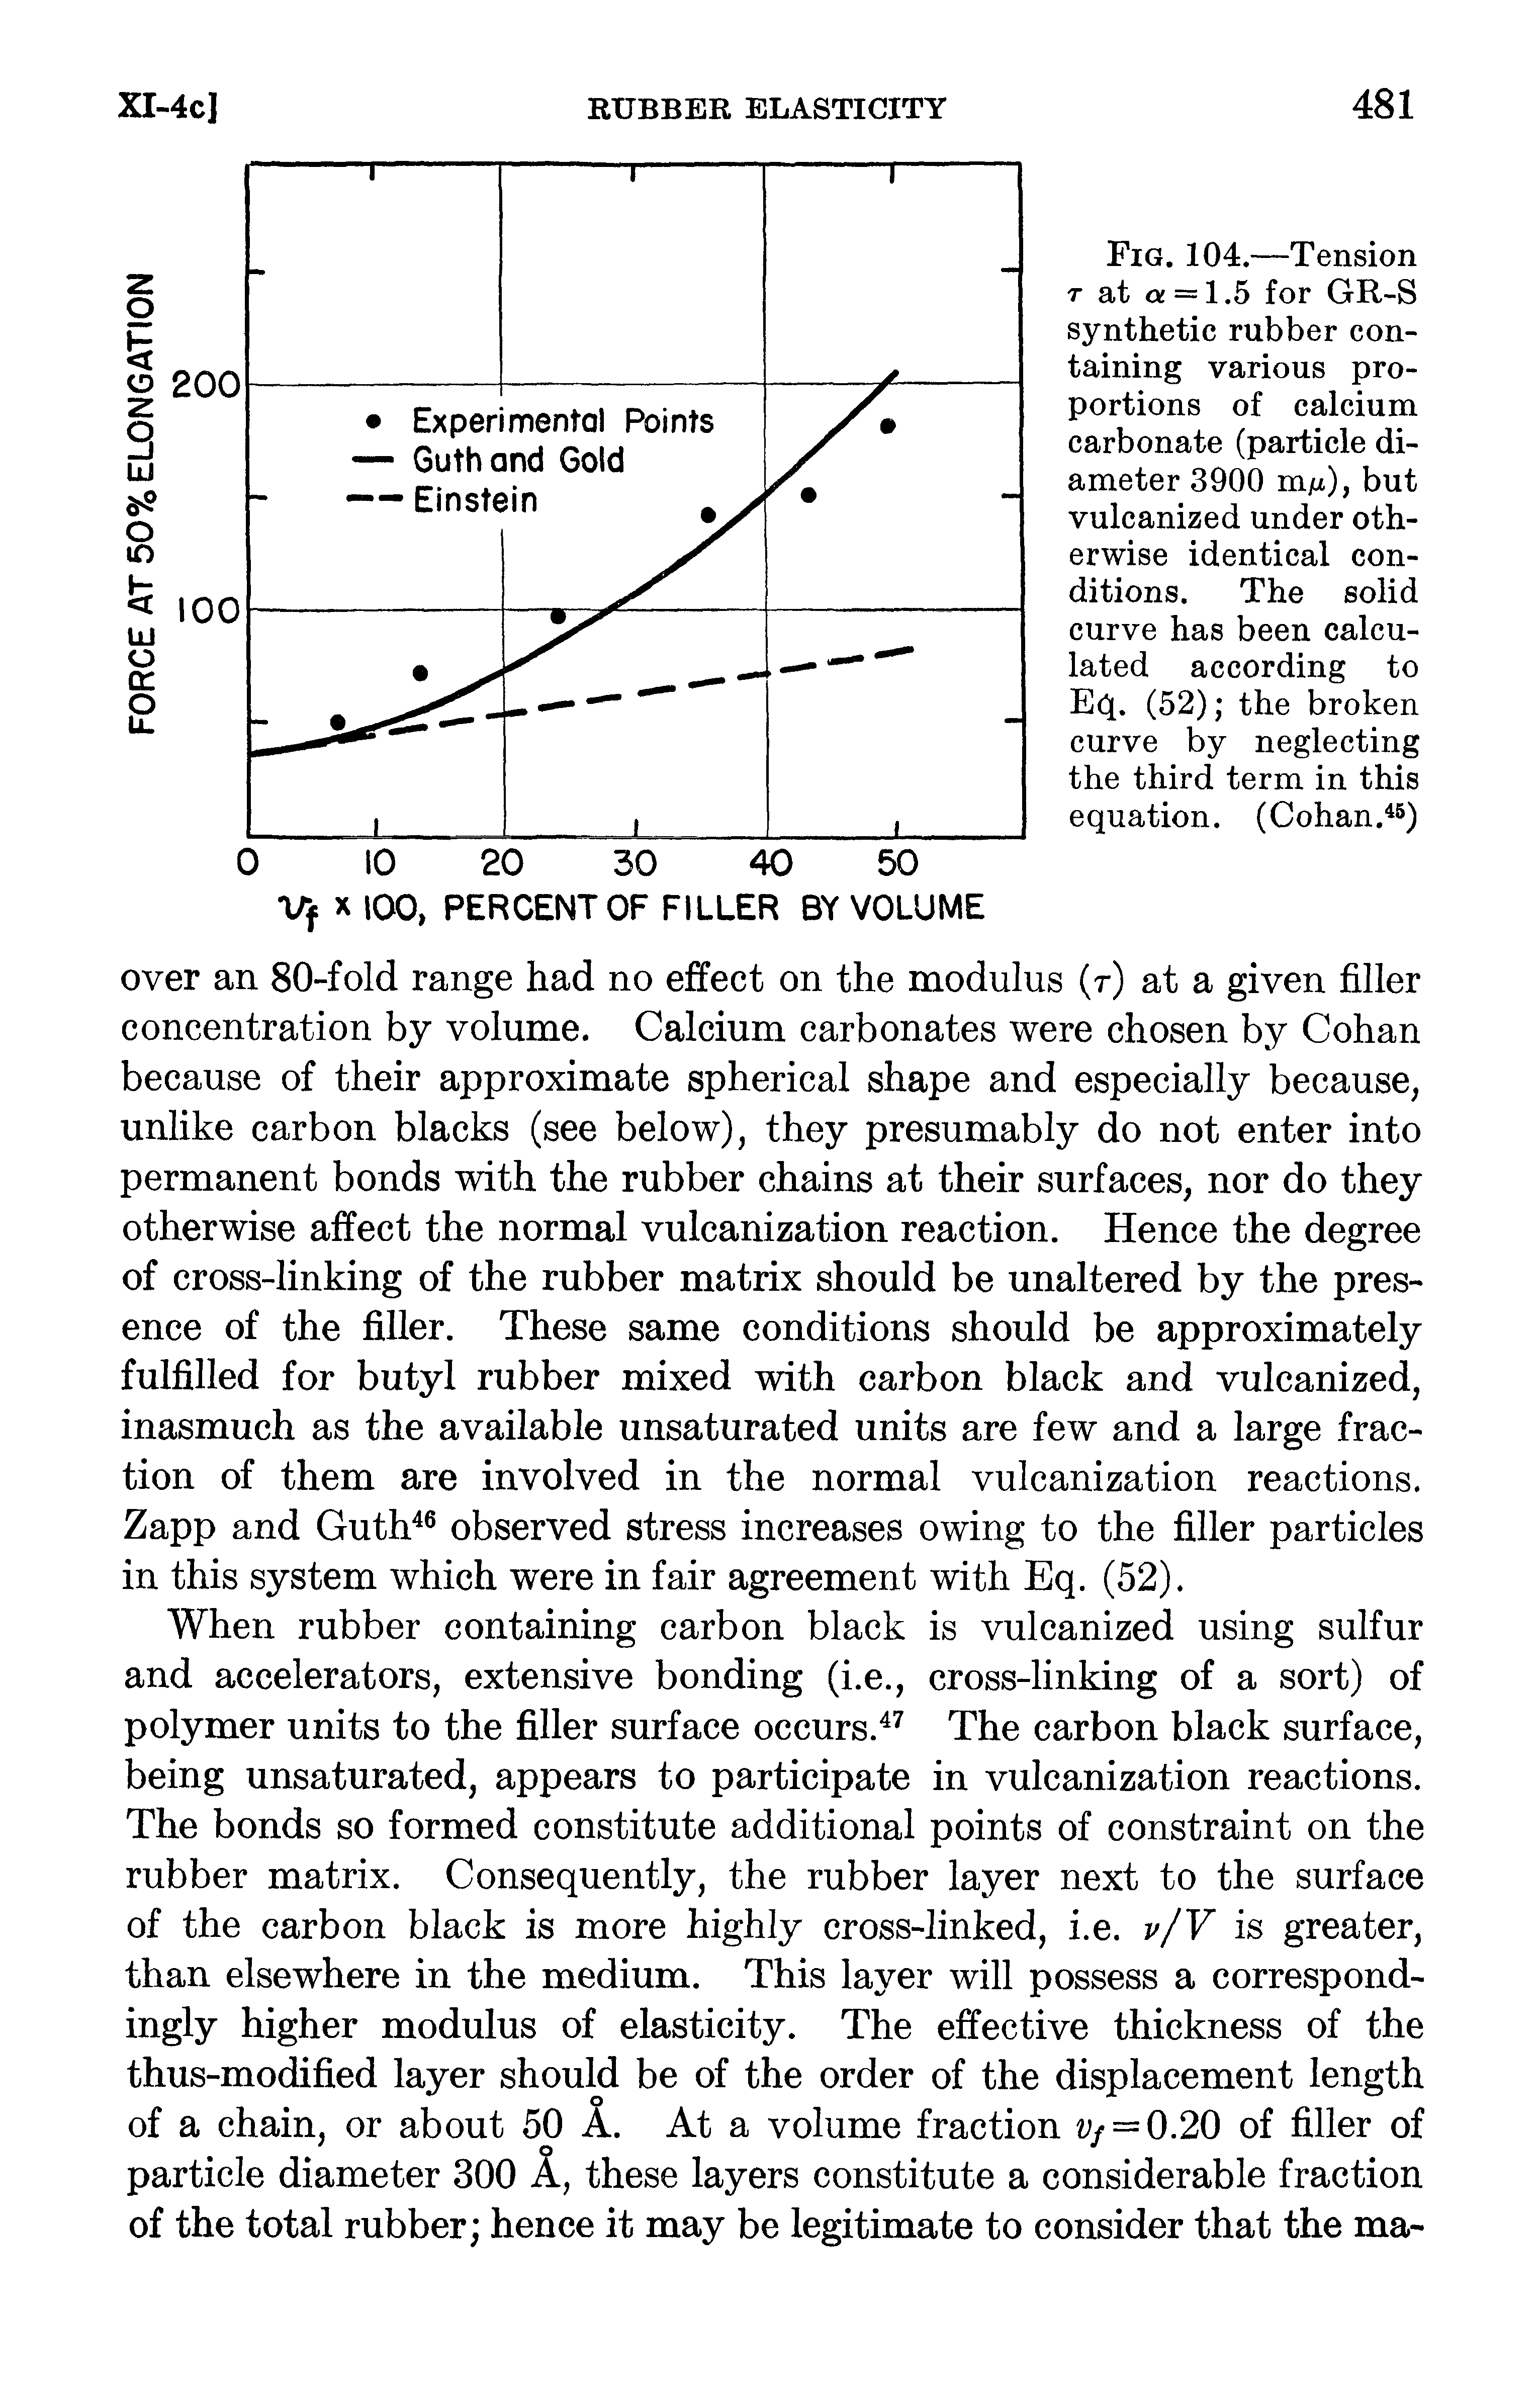 Fig. 104.—Tension r at O = 1.5 for GR-S synthetic rubber containing various proportions of calcium carbonate (particle diameter 3900 mju), but vulcanized under otherwise identical conditions. The solid curve has been calculated according to Ed. (52) the broken curve by neglecting the third term in this equation. (Cohan. s)...